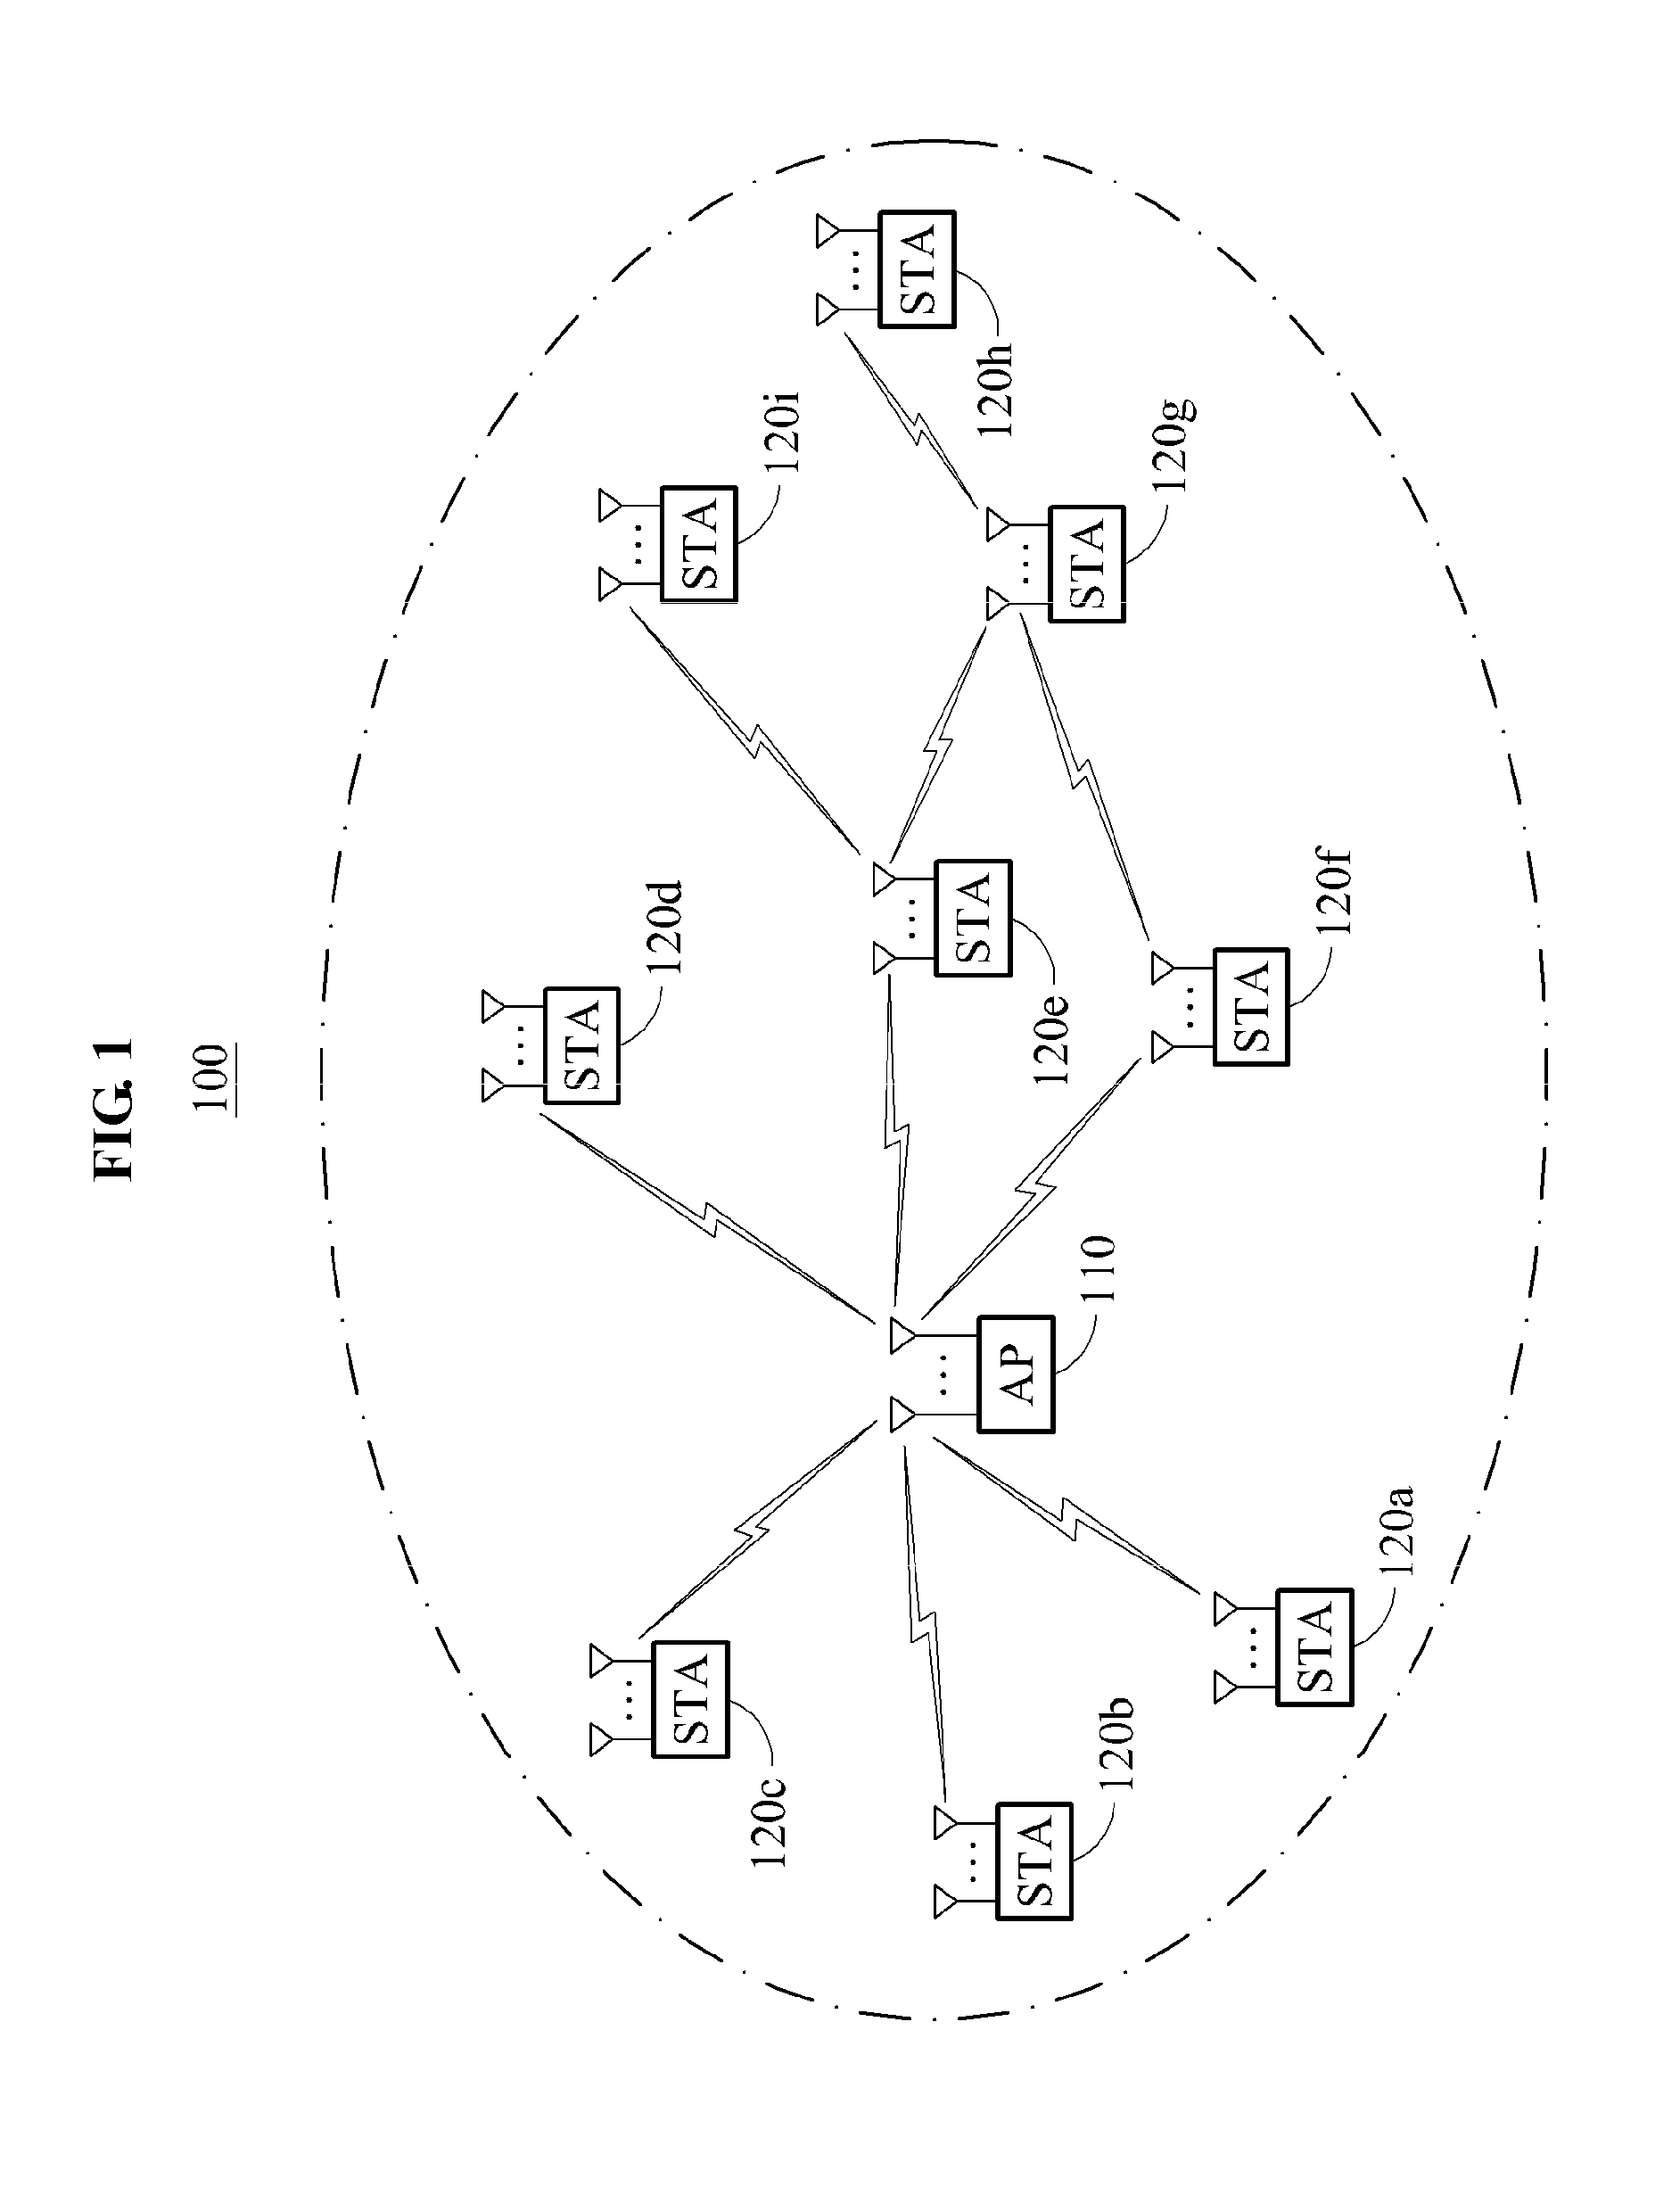 Wireless communication method for enhancing transmission efficiency through separating transmission interval in wireless local area network (WLAN) system